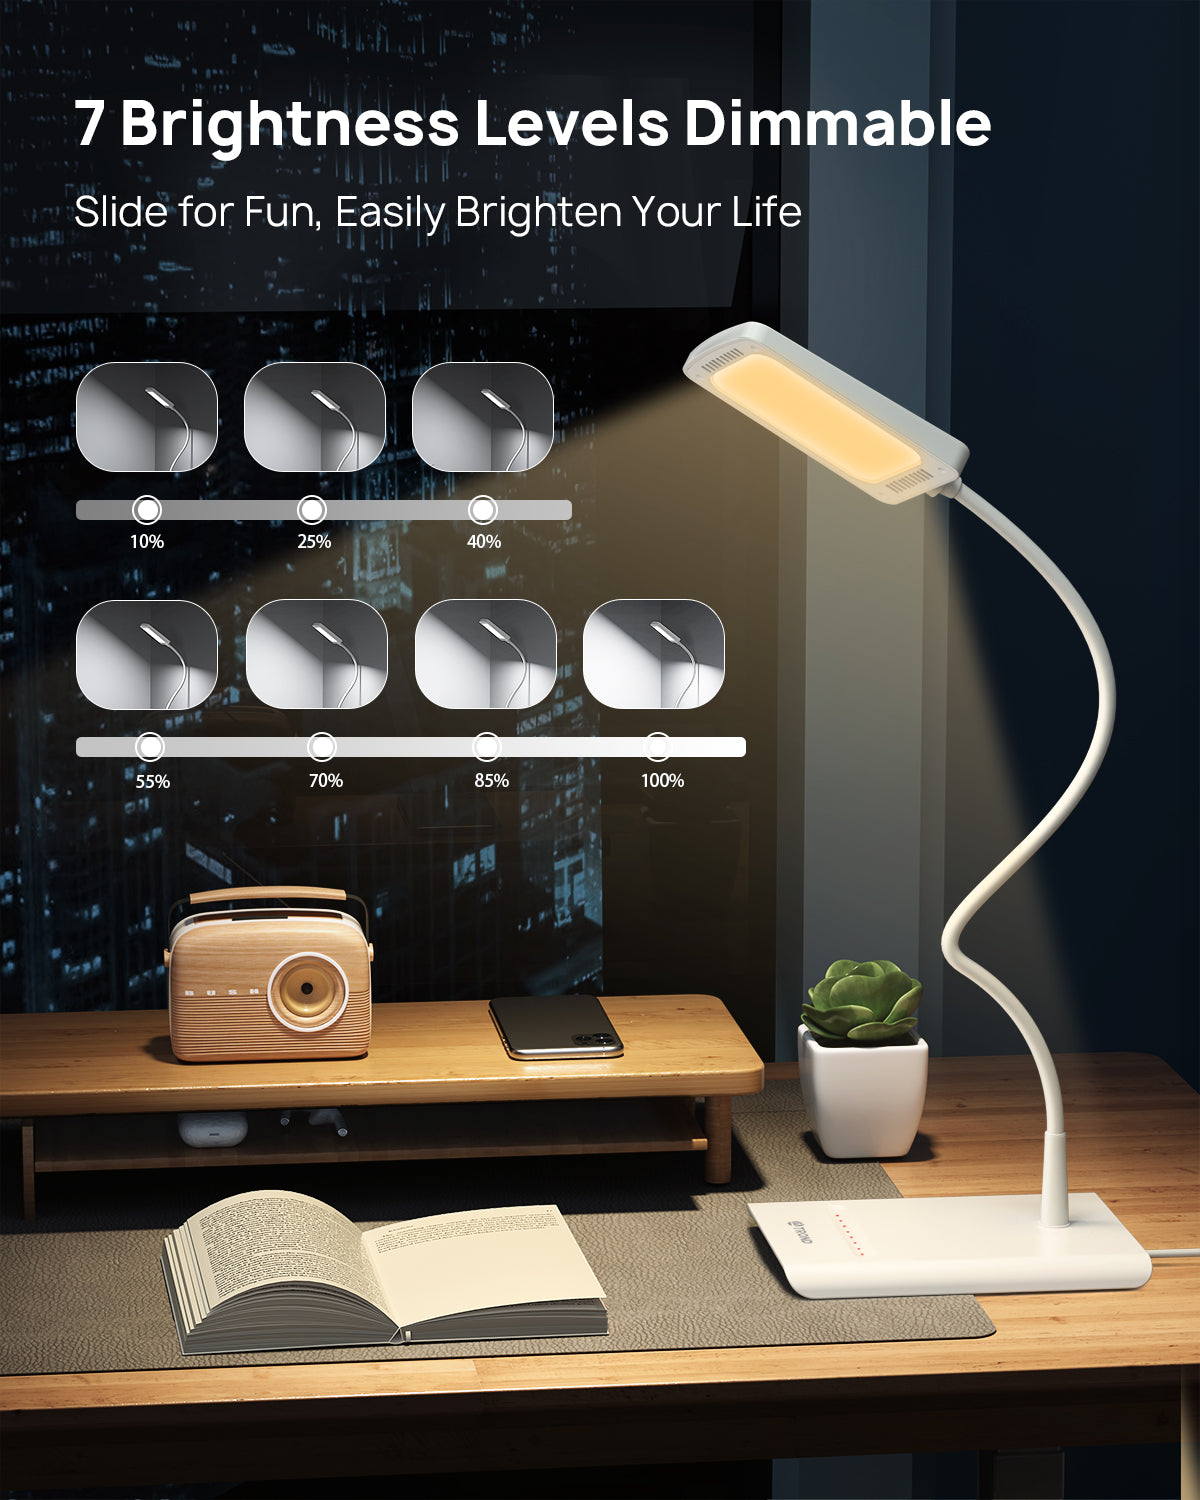 LED Desk Lamp for Home Office, 3 Color Modes 7 Brightness, Dimmable Table Lamp